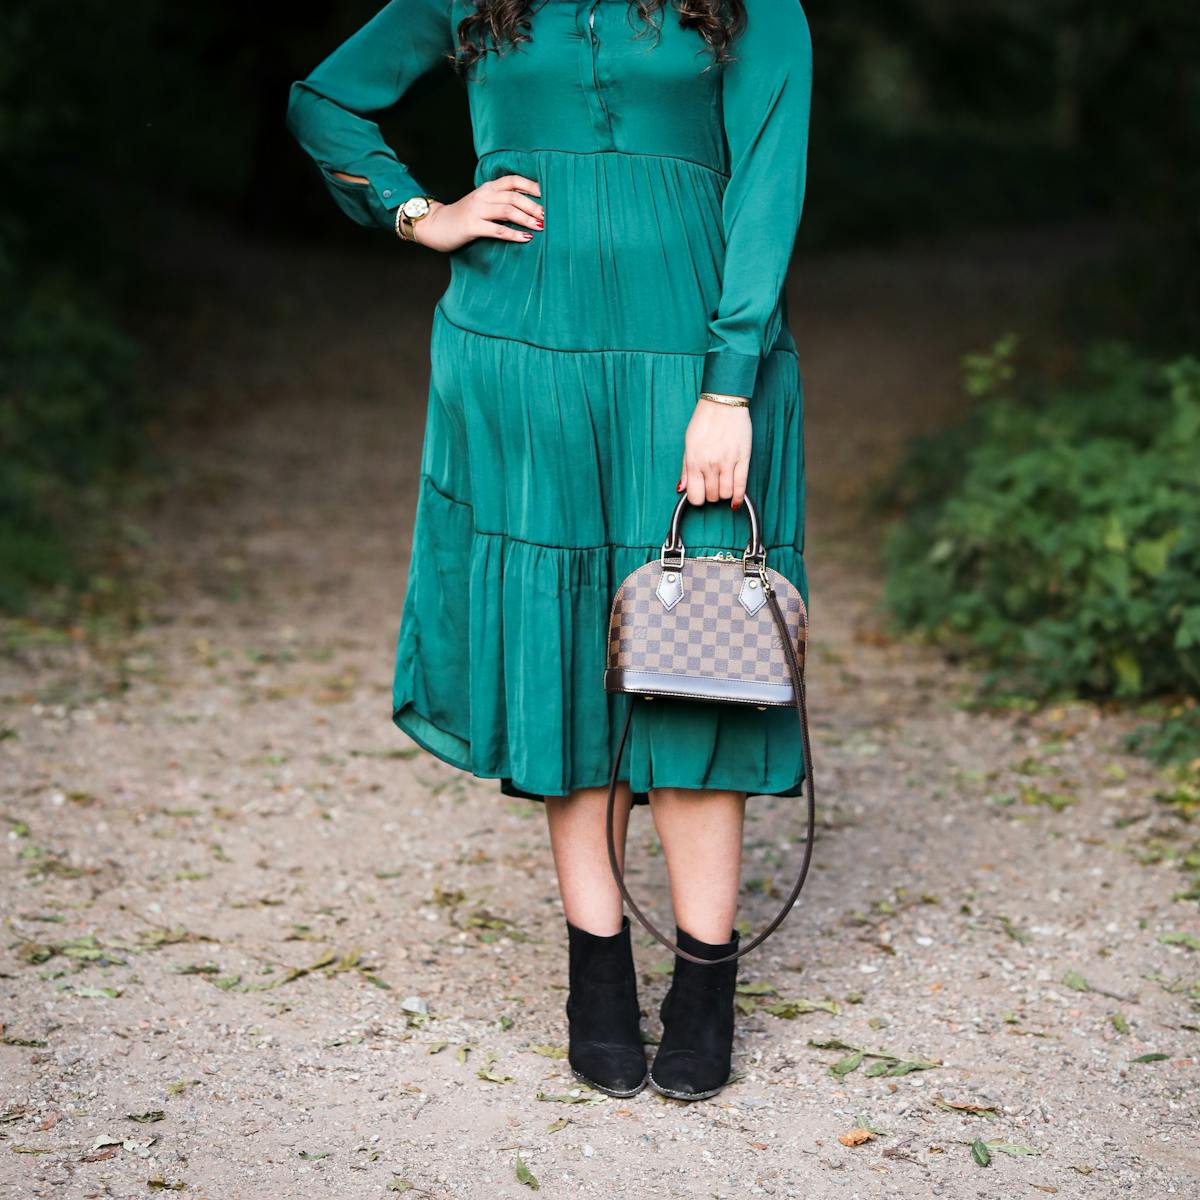 Photograph of a woman from her shoulders to her feet, wearing an emerald green dress with a shiny lustre. She is standing with her right hand on her hip and in her left hand she is holding a small hand bag in front of her left leg. In the background can be seen a park or woodland scene with a footpath disappearing into the distance. On either side of the path is green vegetation.